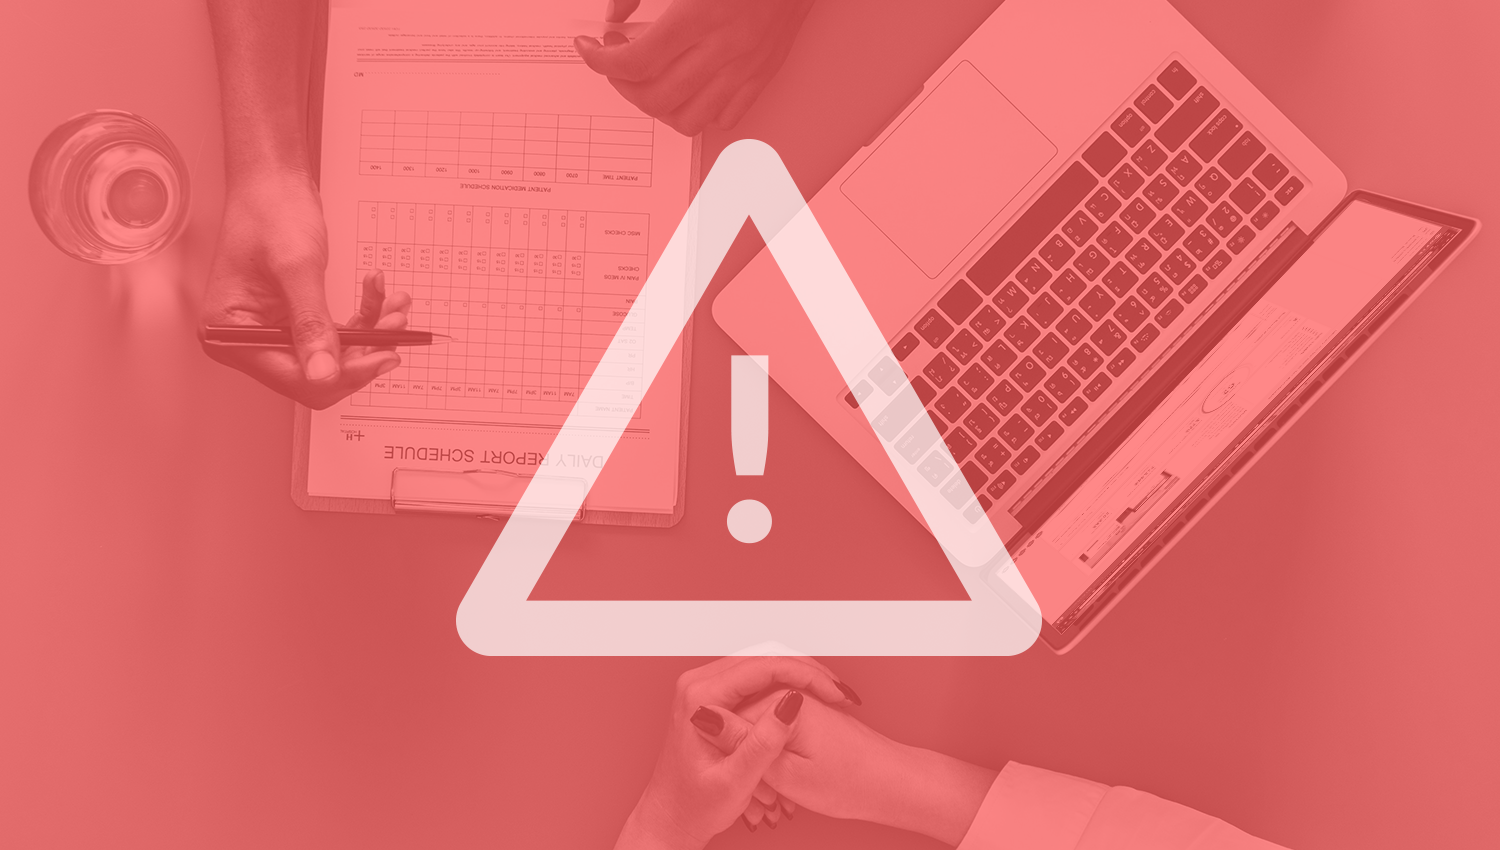 How to Find and Fix Critical Website Errors